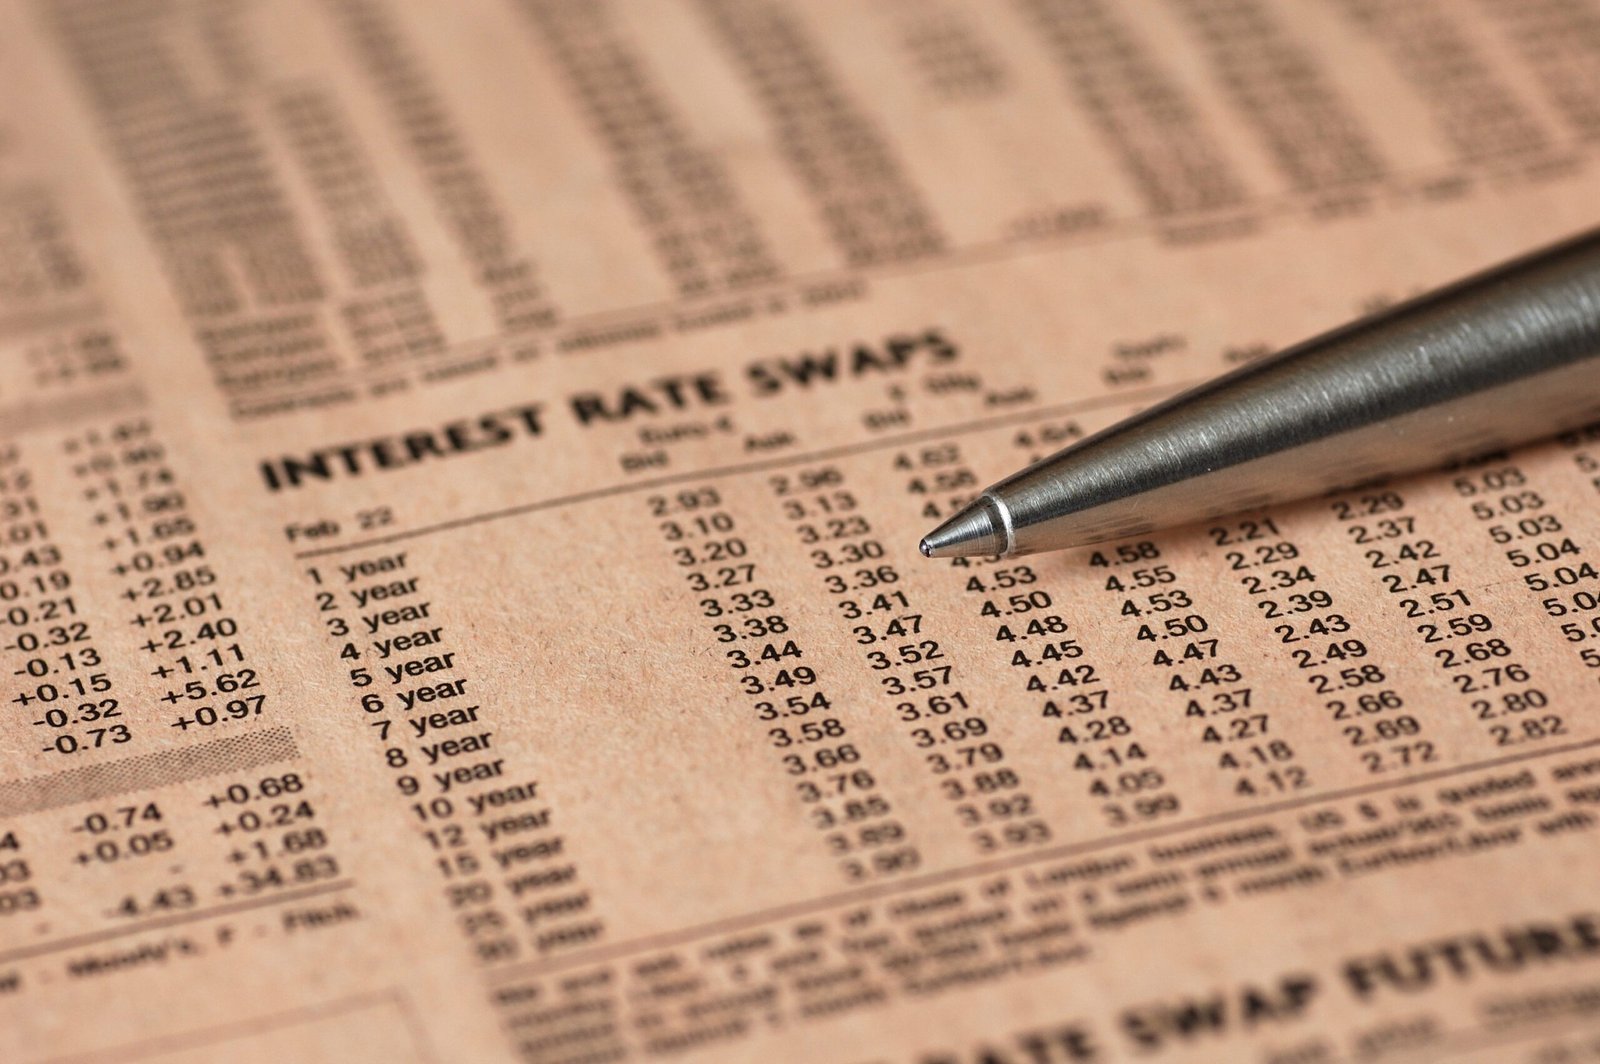 Newspaper showing a table with swap rates and a pen